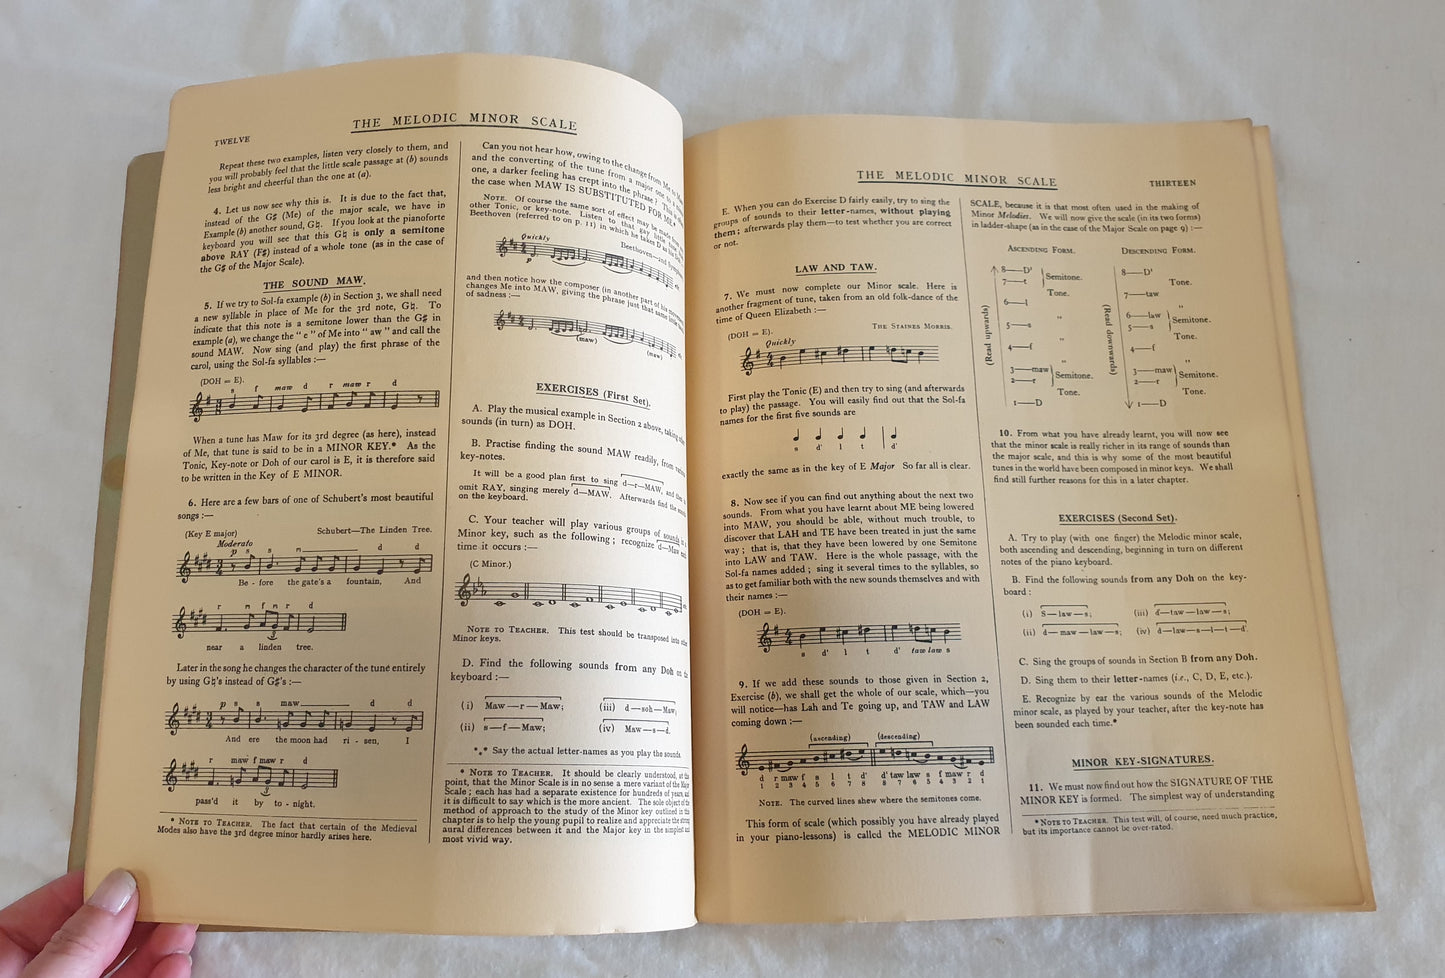 First Steps in Musicianship by Stewart MacPherson and Hilda Collens